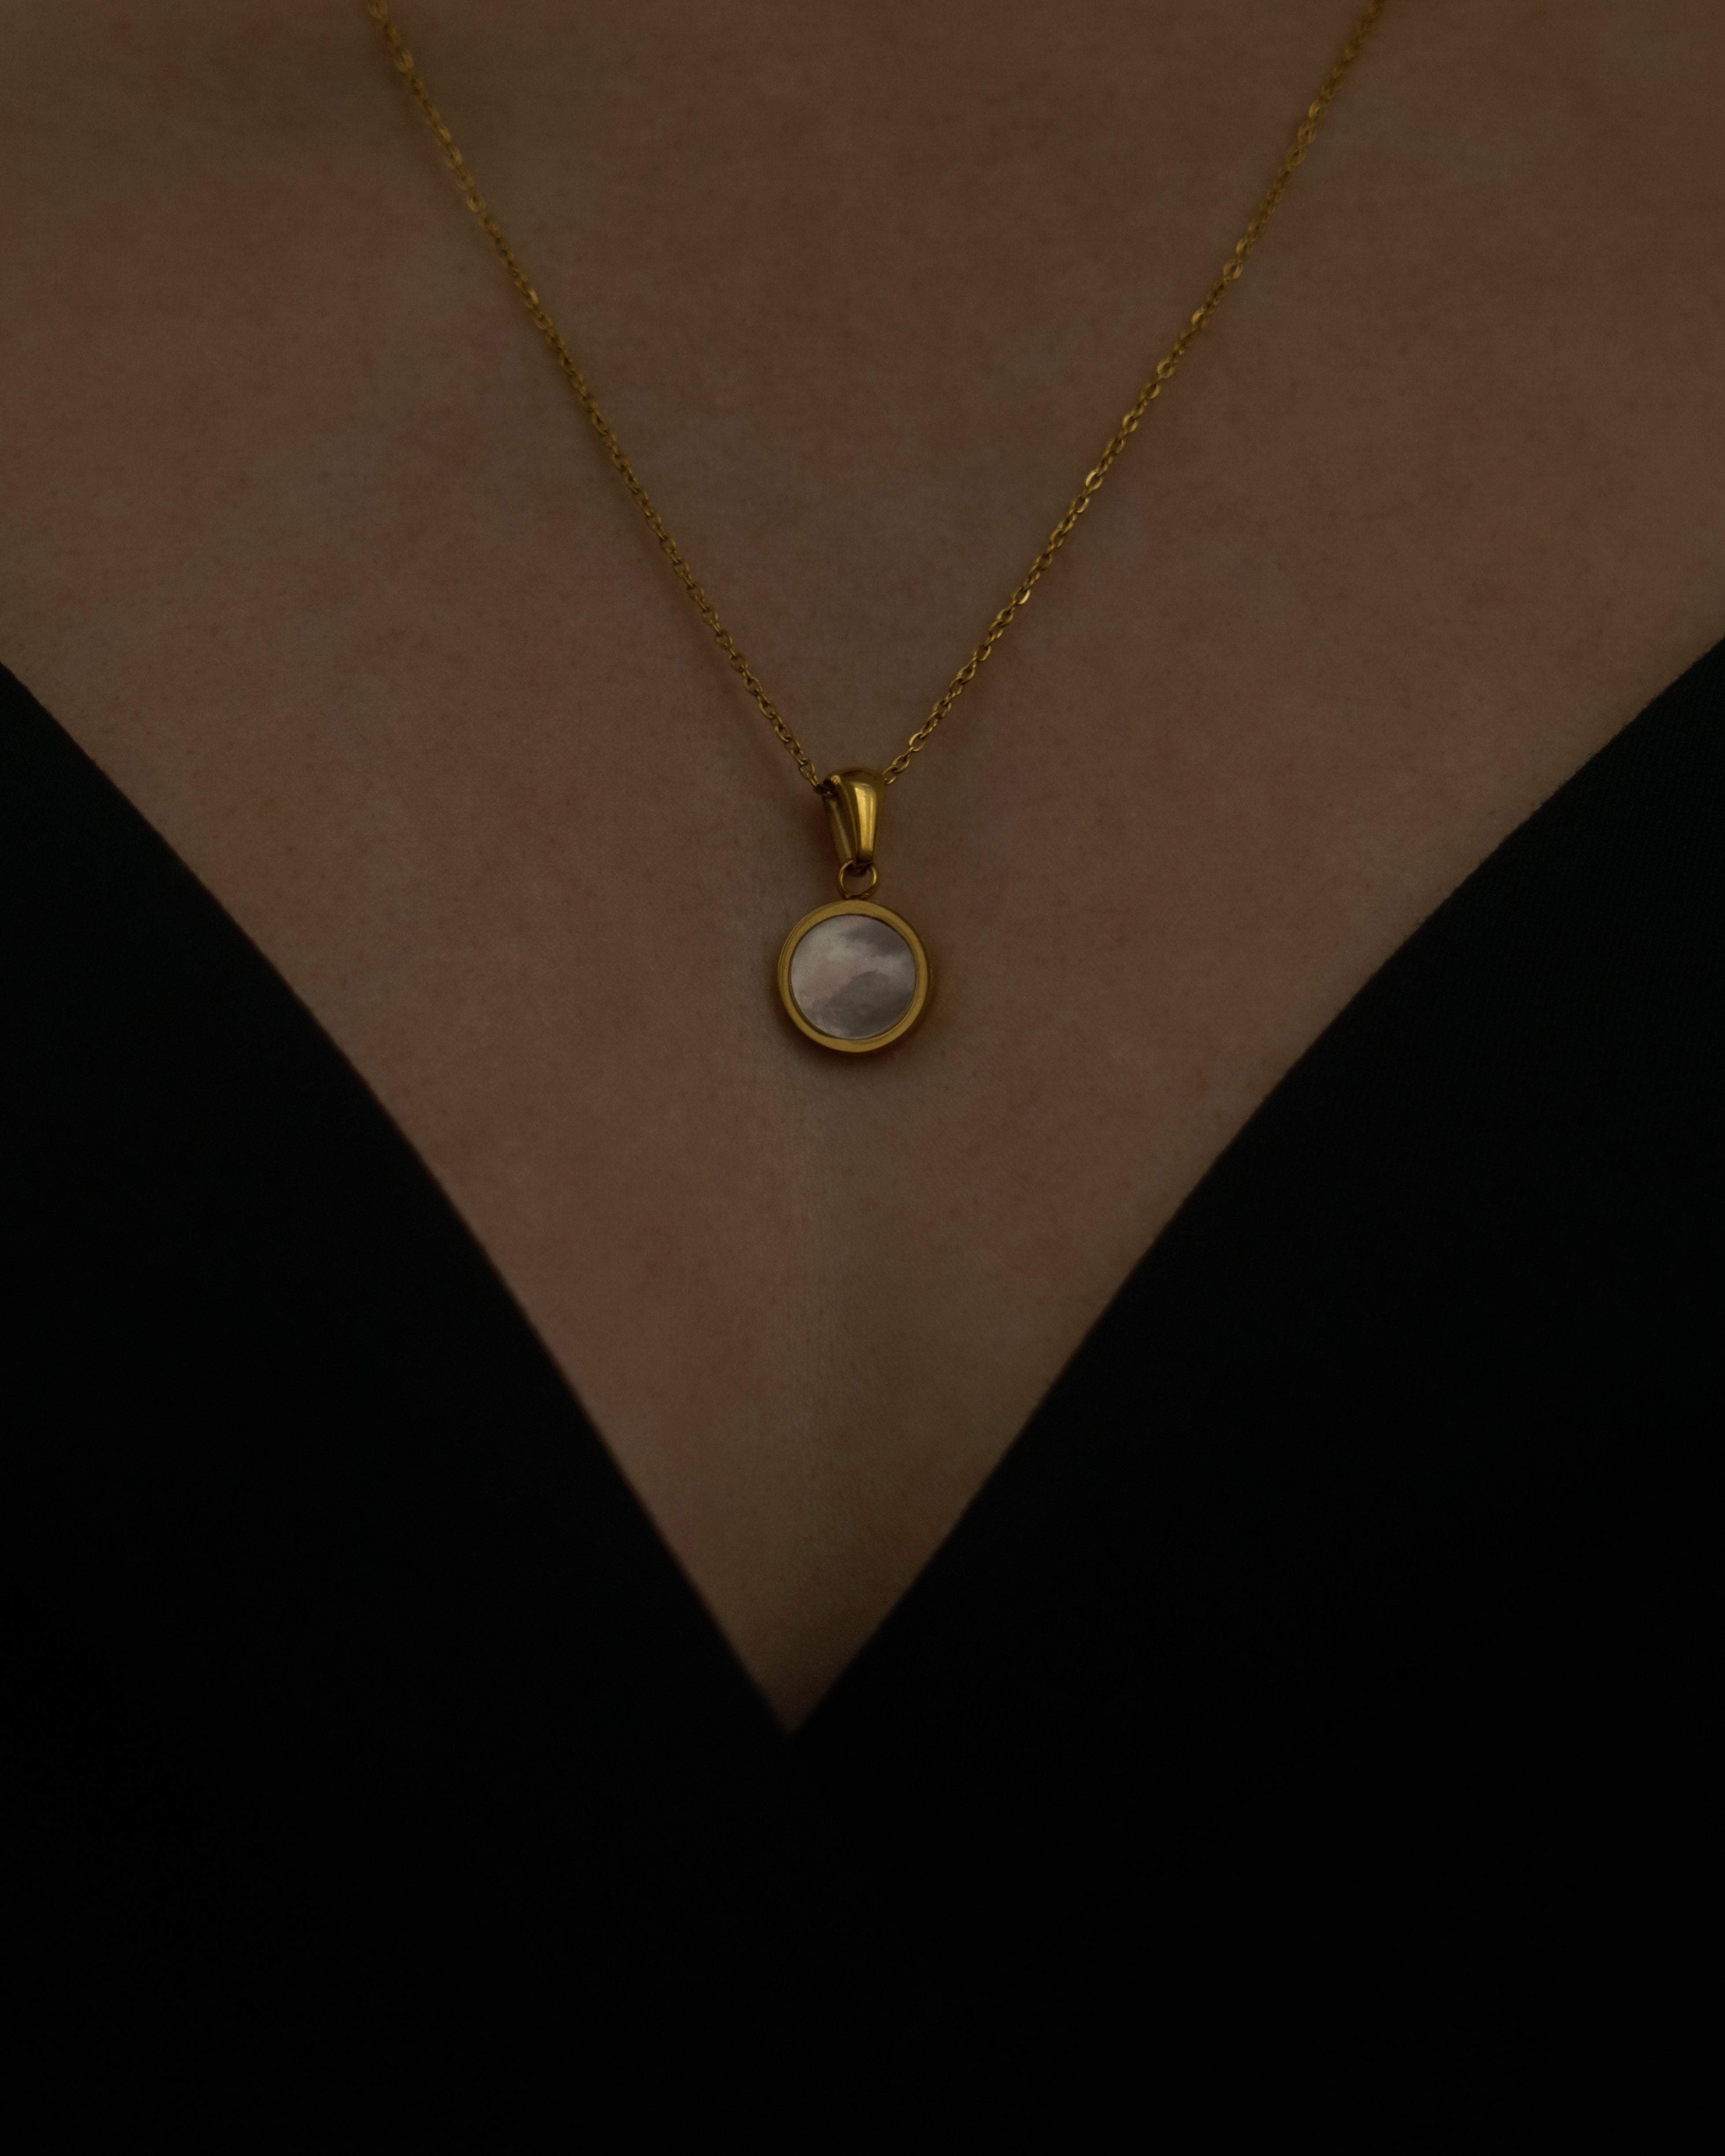 MYJN Necklaces 18K Gold Stainless Steel Karina Mother Of Pearl Necklace